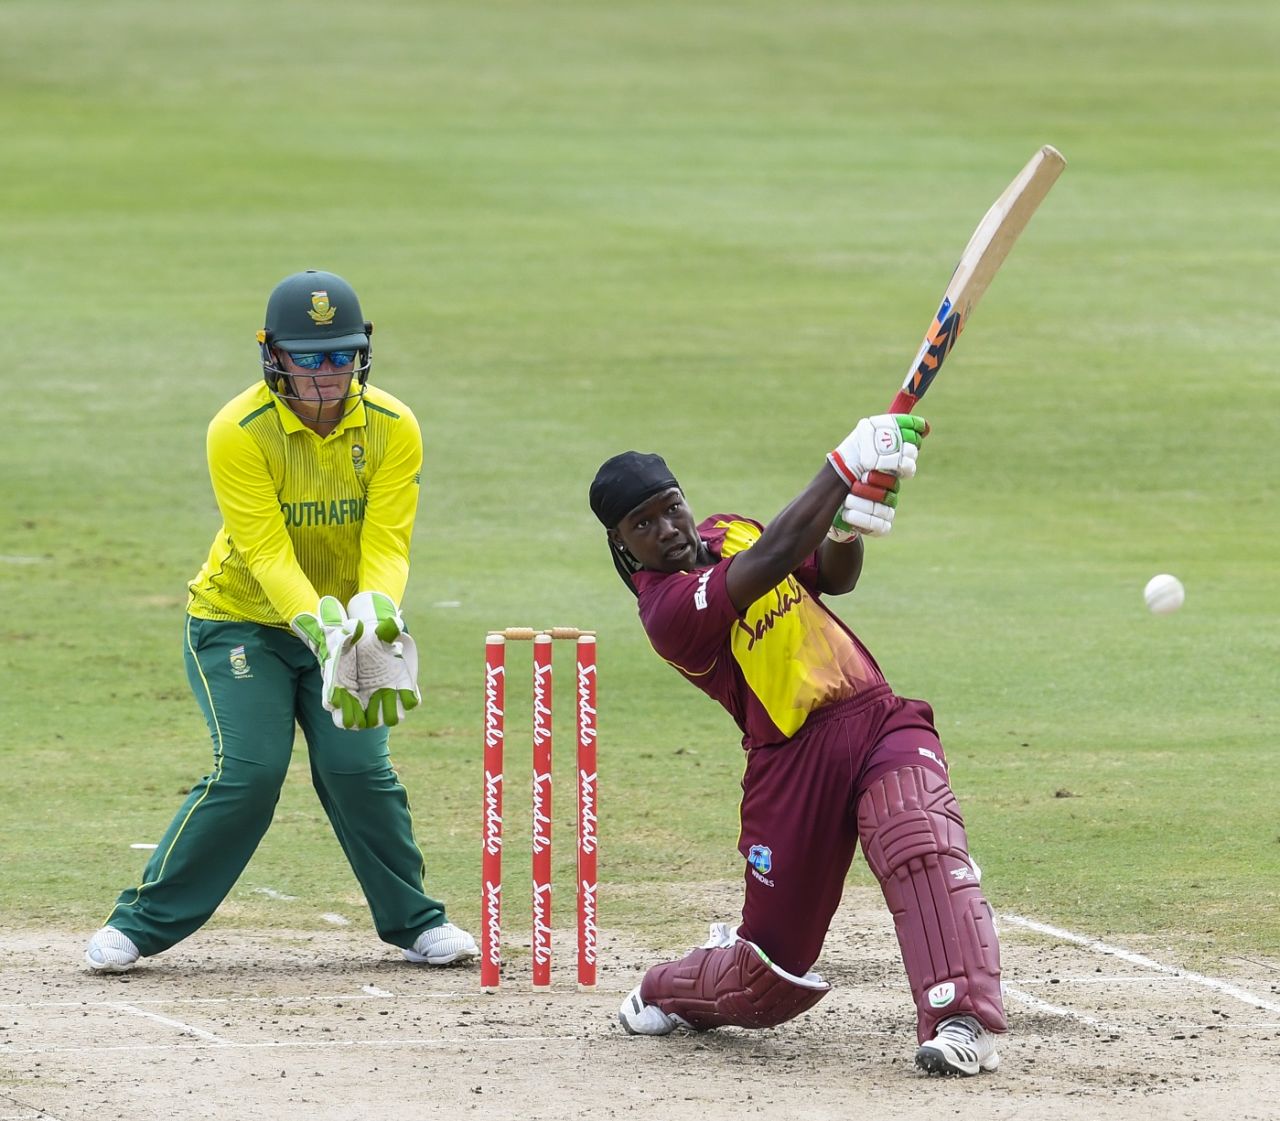 Deandra Dottin goes over the top, West Indies women v South Africa women, 1st T20I, Barbados, September 24, 2018